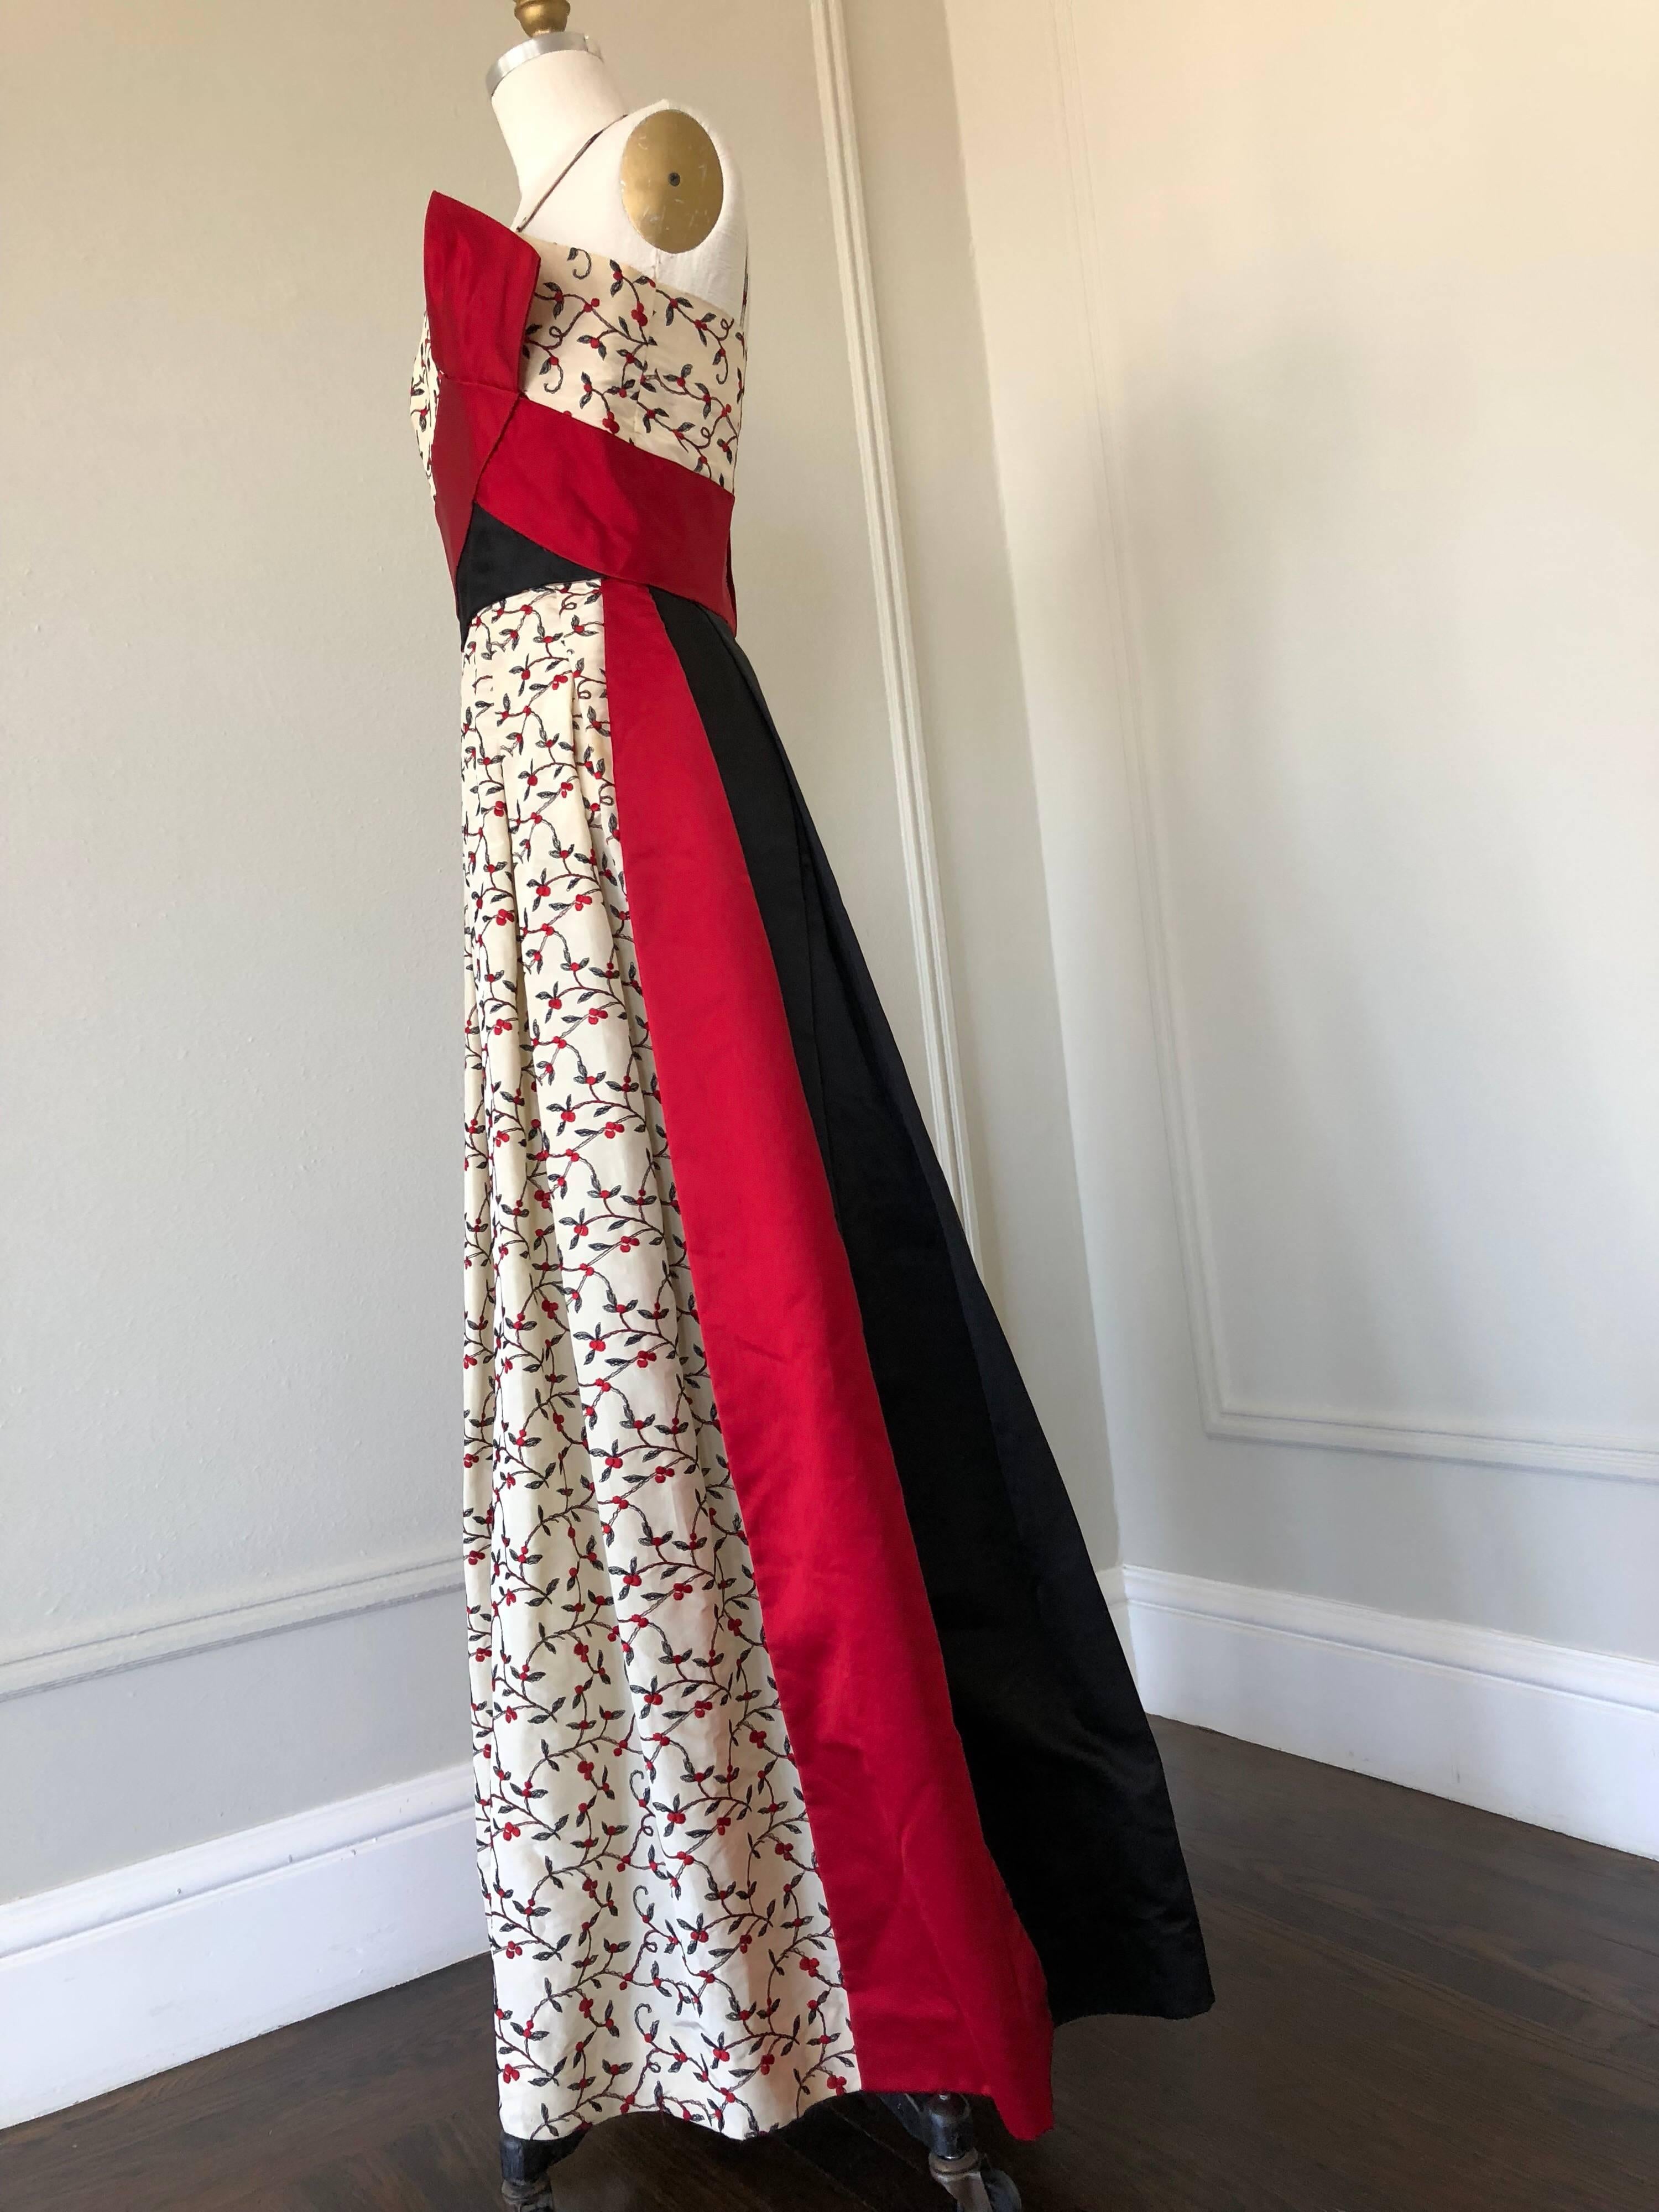 An elegant 1950s evening gown by Oleg Cassini features cream silk embroidered floral motif silk taffeta fabric with a red silk sash at the bodice and black silk satin backside. 
This genius and spontaneous design make this gown modern and stylish in